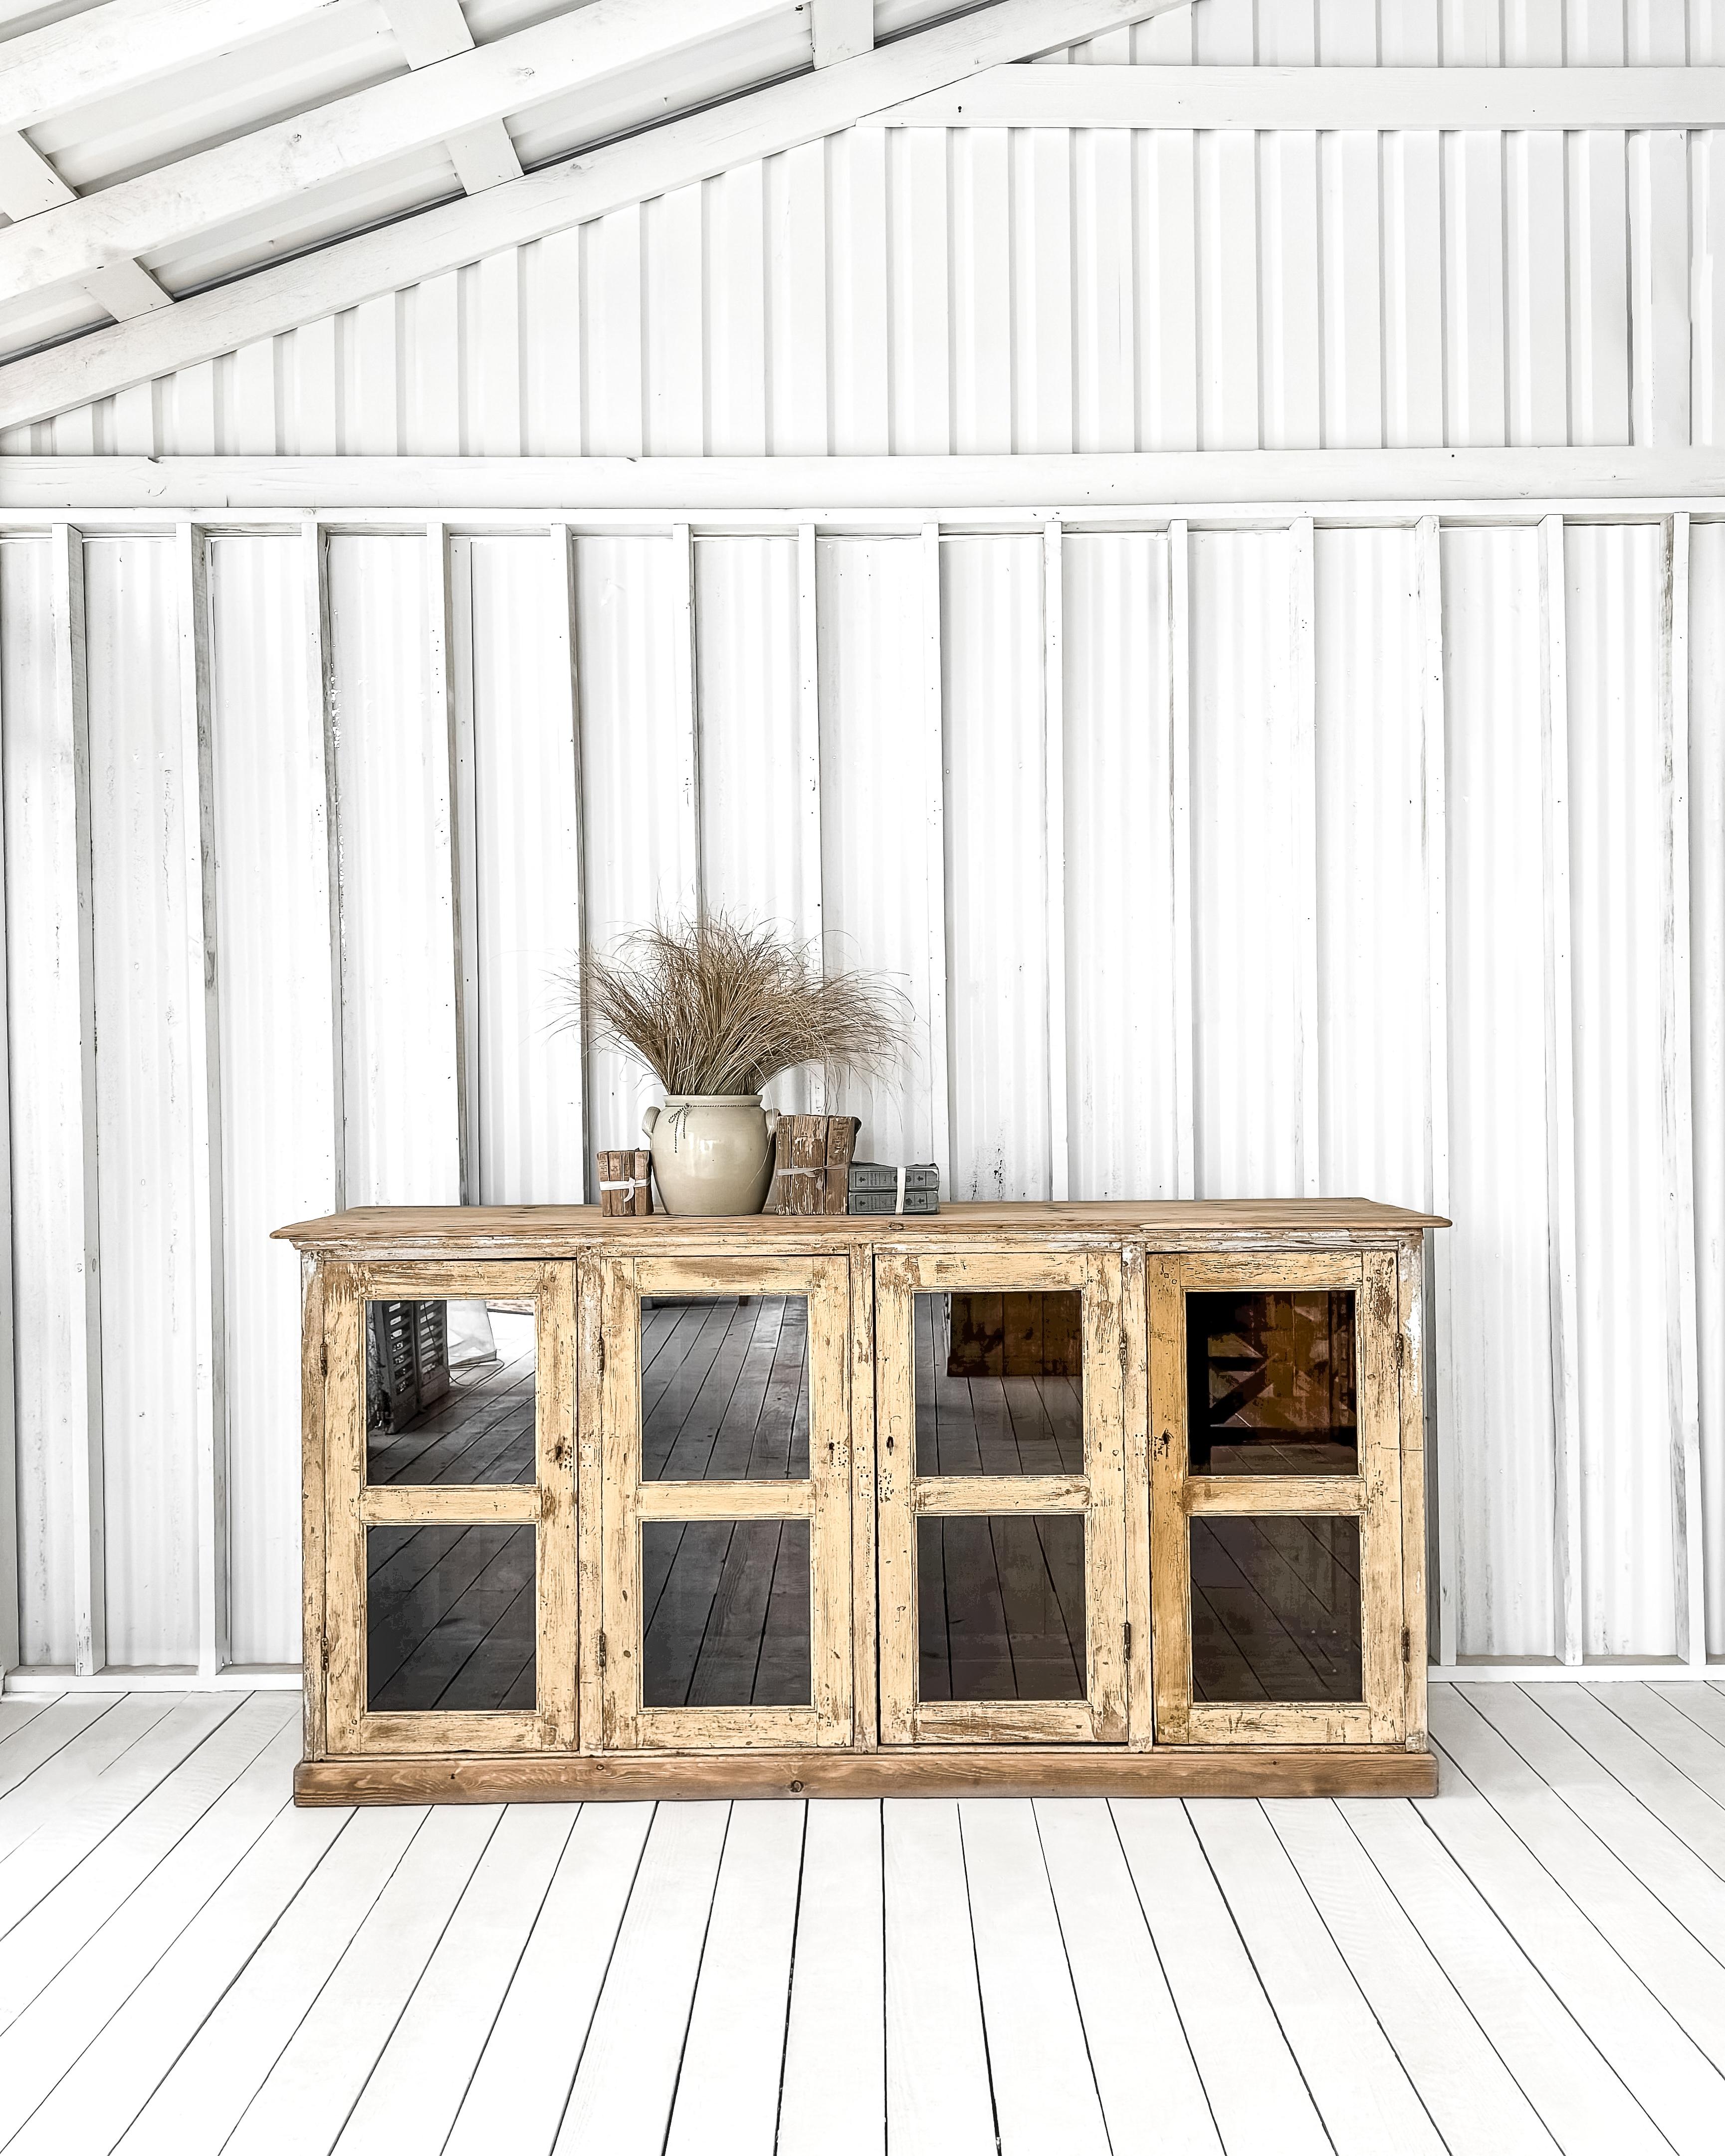 A large and handsome solid wood mercantile display cabinet found in France. This beauty boasts four framed glass doors, making it perfect for showcasing your collectibles.

Crafted with raised paneled sides, an ogee edge top, and a thick baseboard,